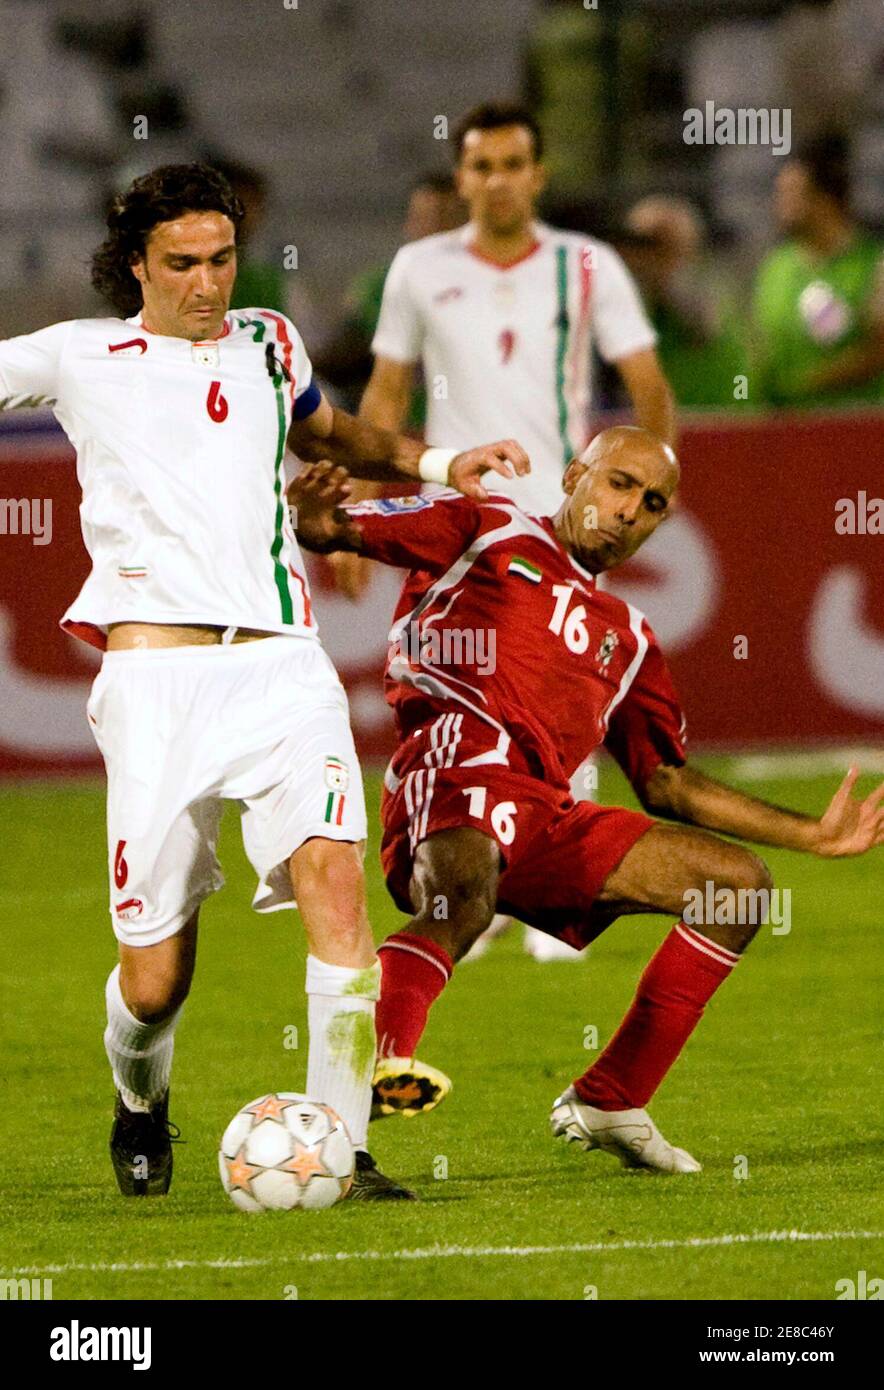 Iran's Javad Nekounam (L) fights for the ball with Helal Saeed Humaid al-Saedi of United Arab Emirates during their World Cup 2010 qualifying soccer match in Tehran June 2, 2008. REUTERS/Raheb Homavandi (IRAN) Stock Photo